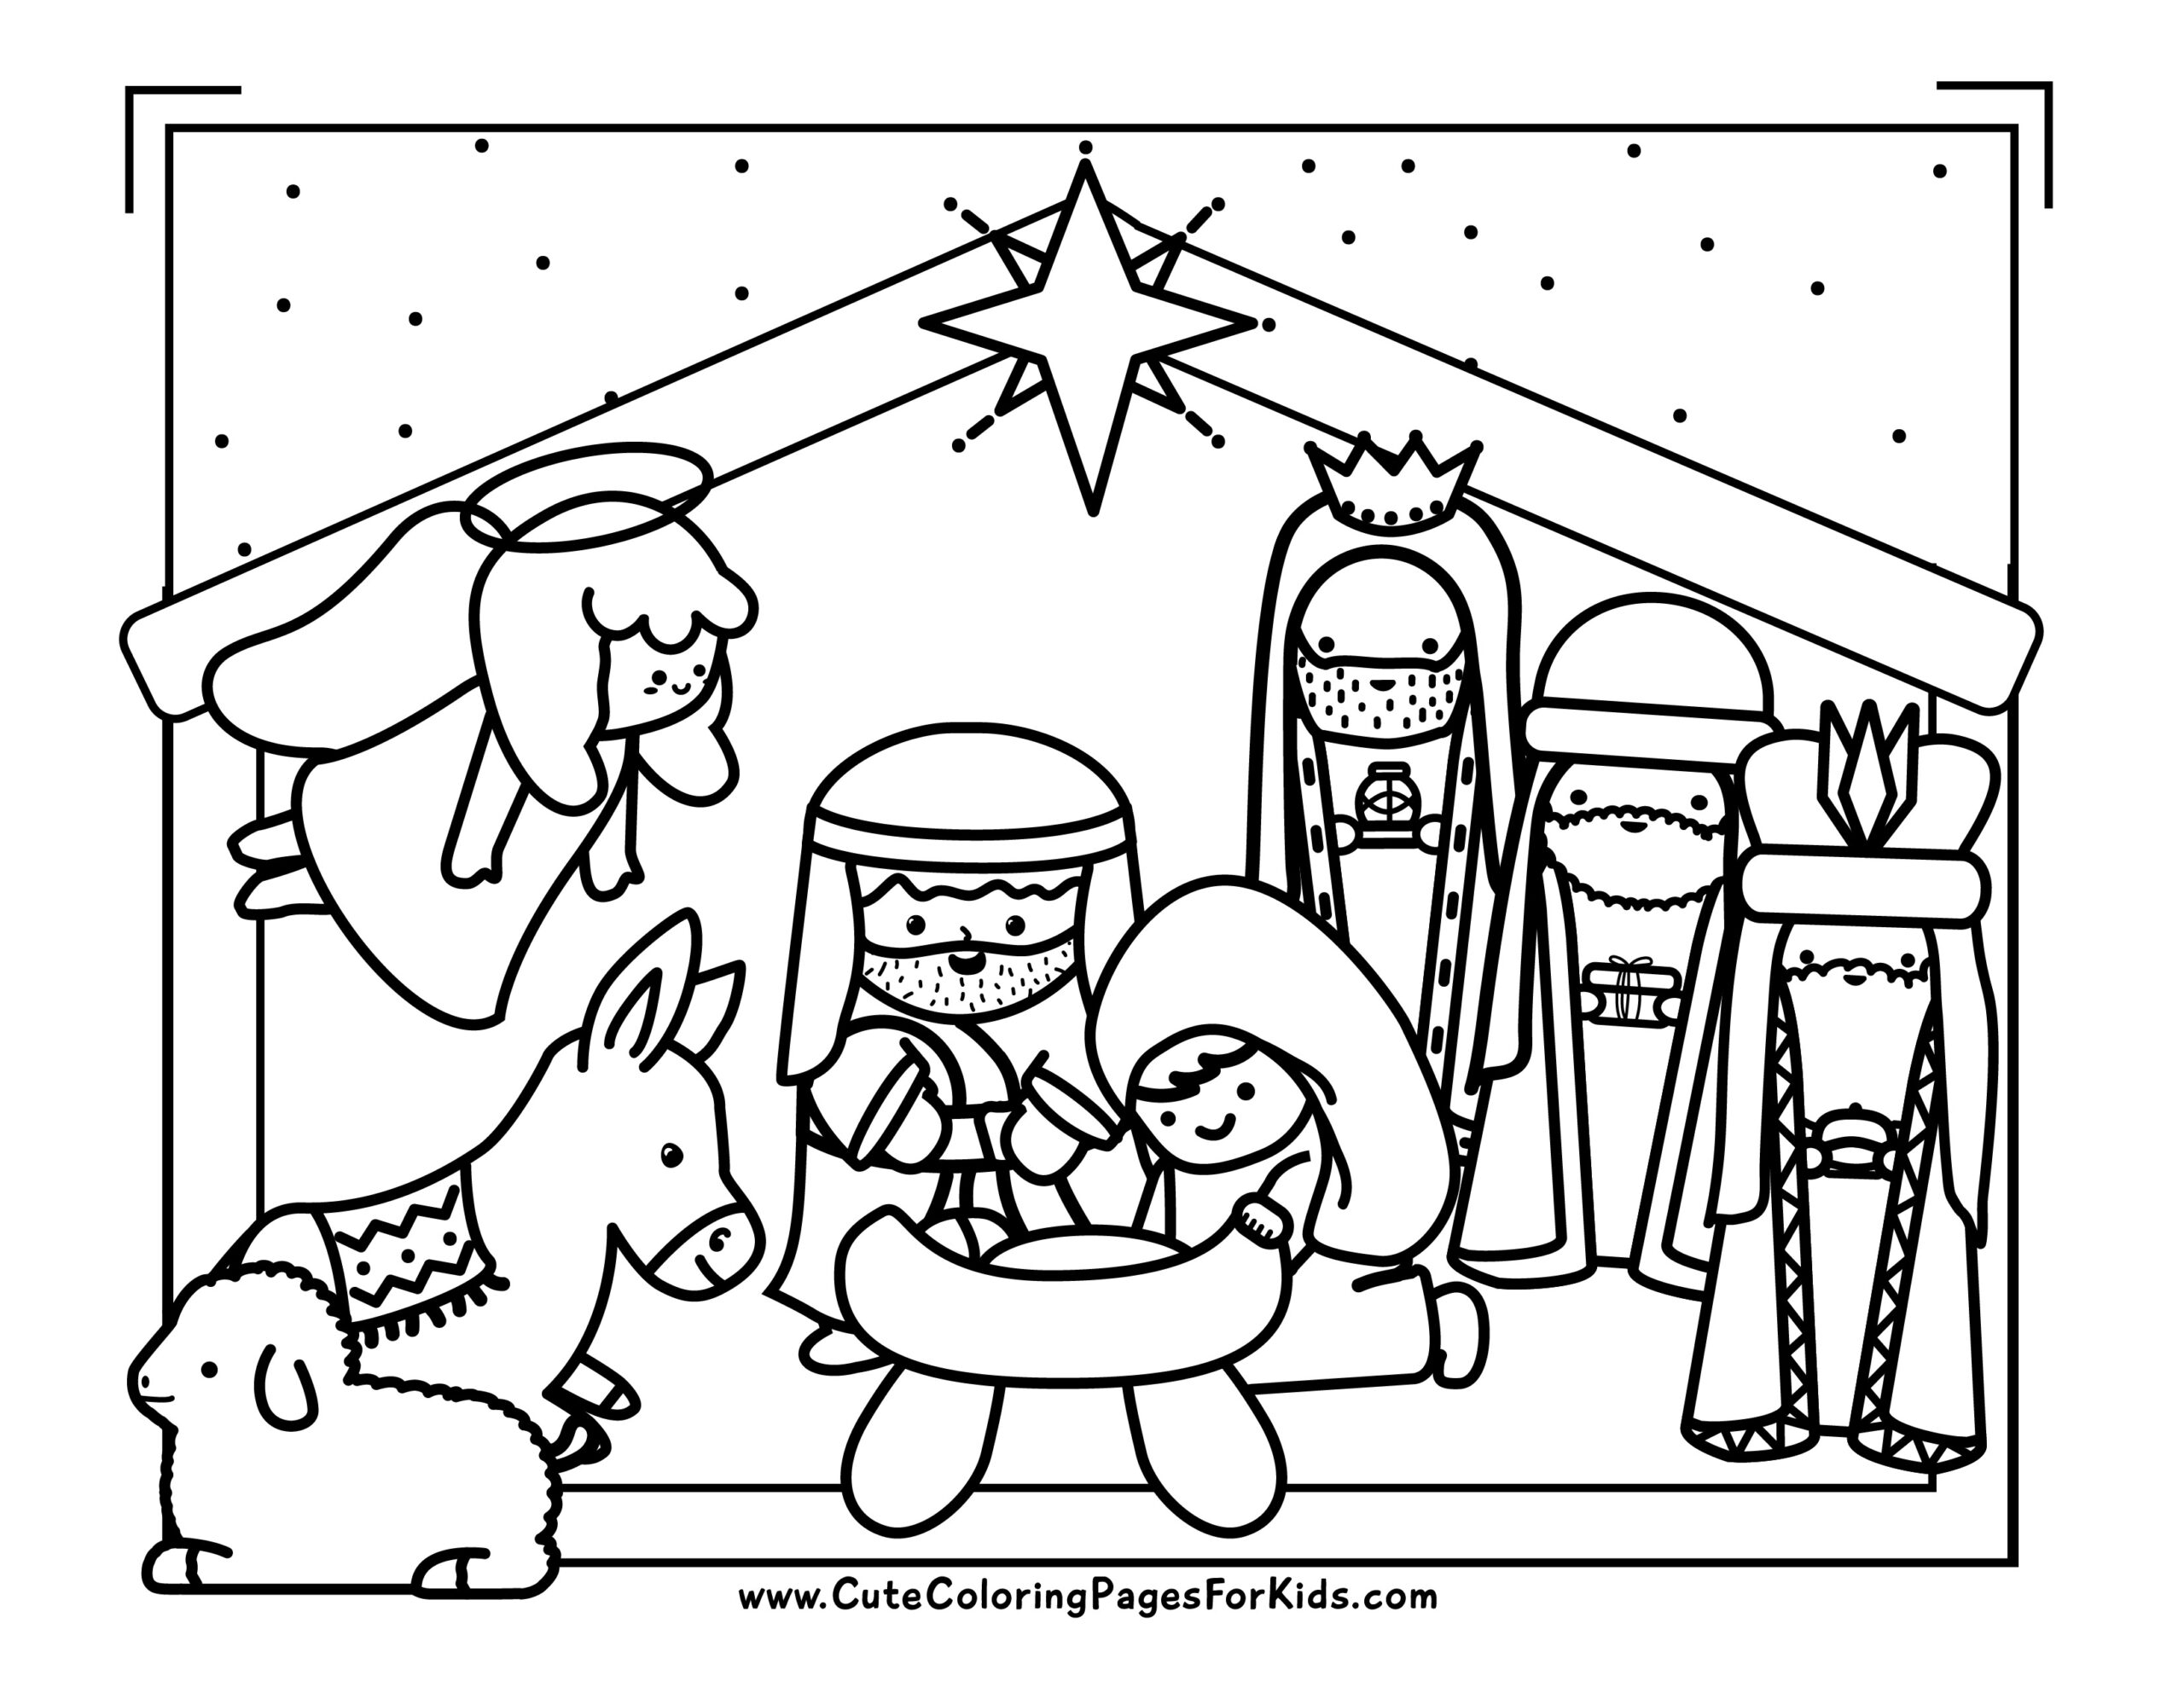 Religious Christmas Coloring Pages - Cute Coloring Pages For Kids